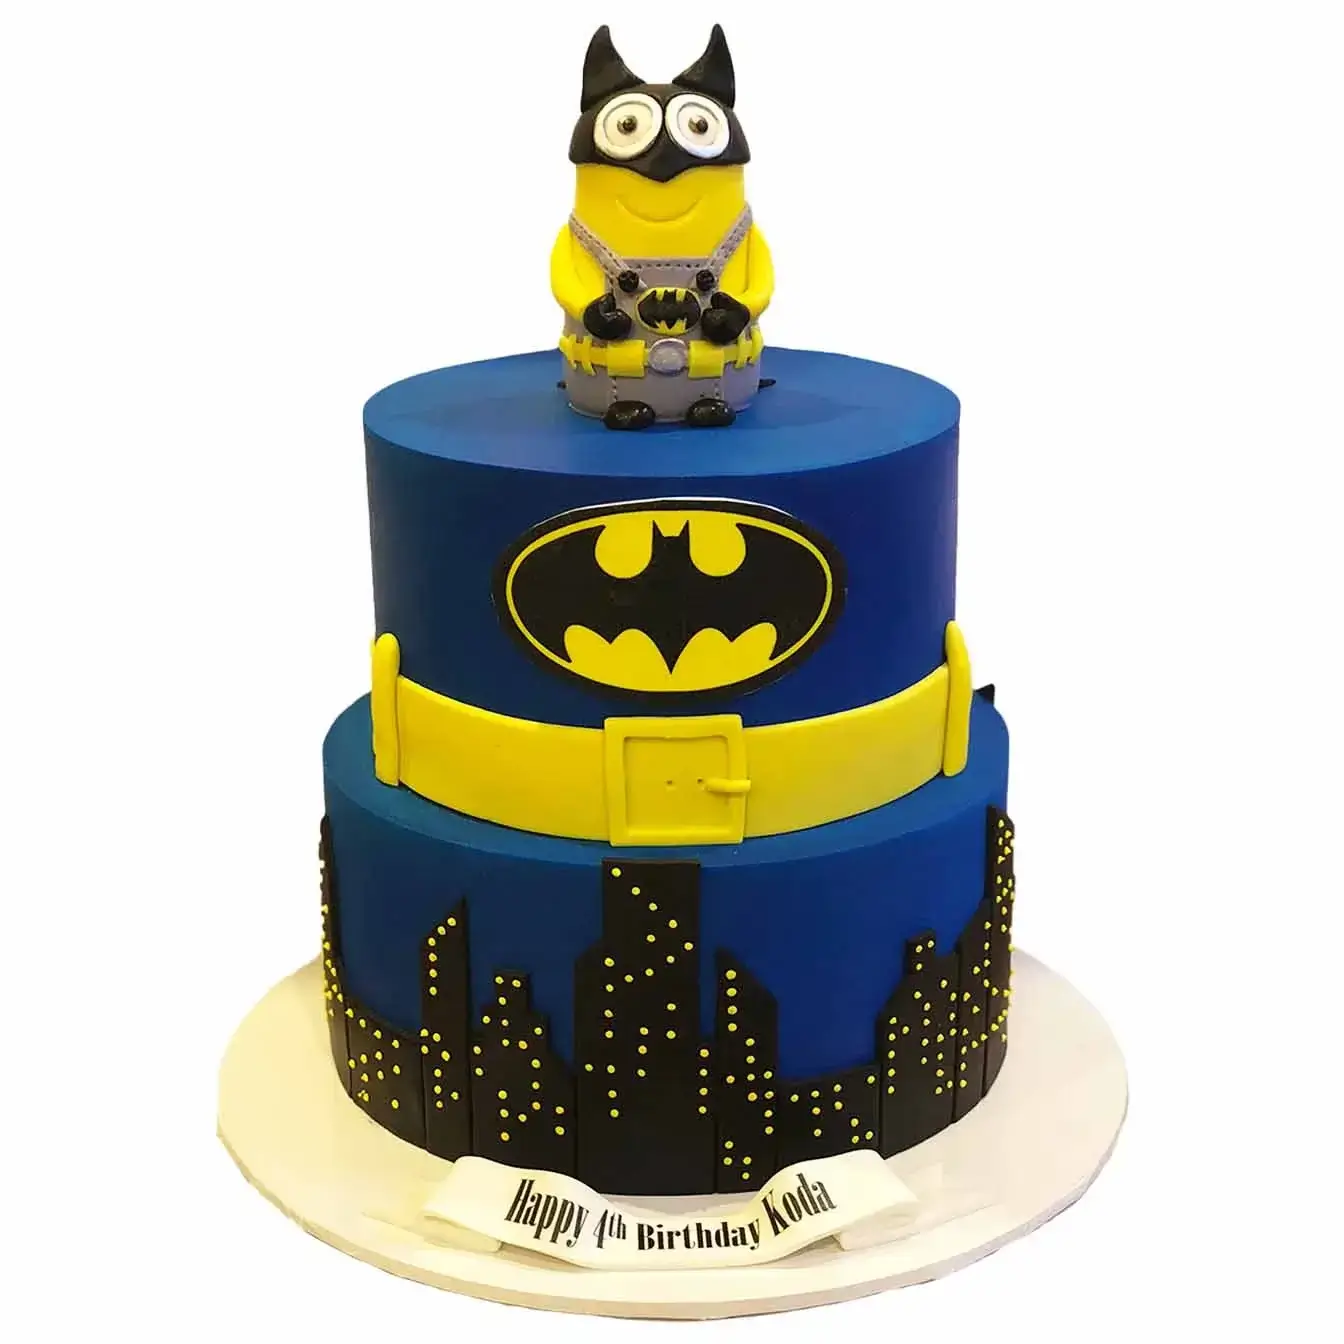 Batman Minion Adventure Cake - A two-tier cake with a cutout Gotham City skyline on the bottom tier and a minion on top dressed as Batman, a playful centerpiece for superhero-themed celebrations.